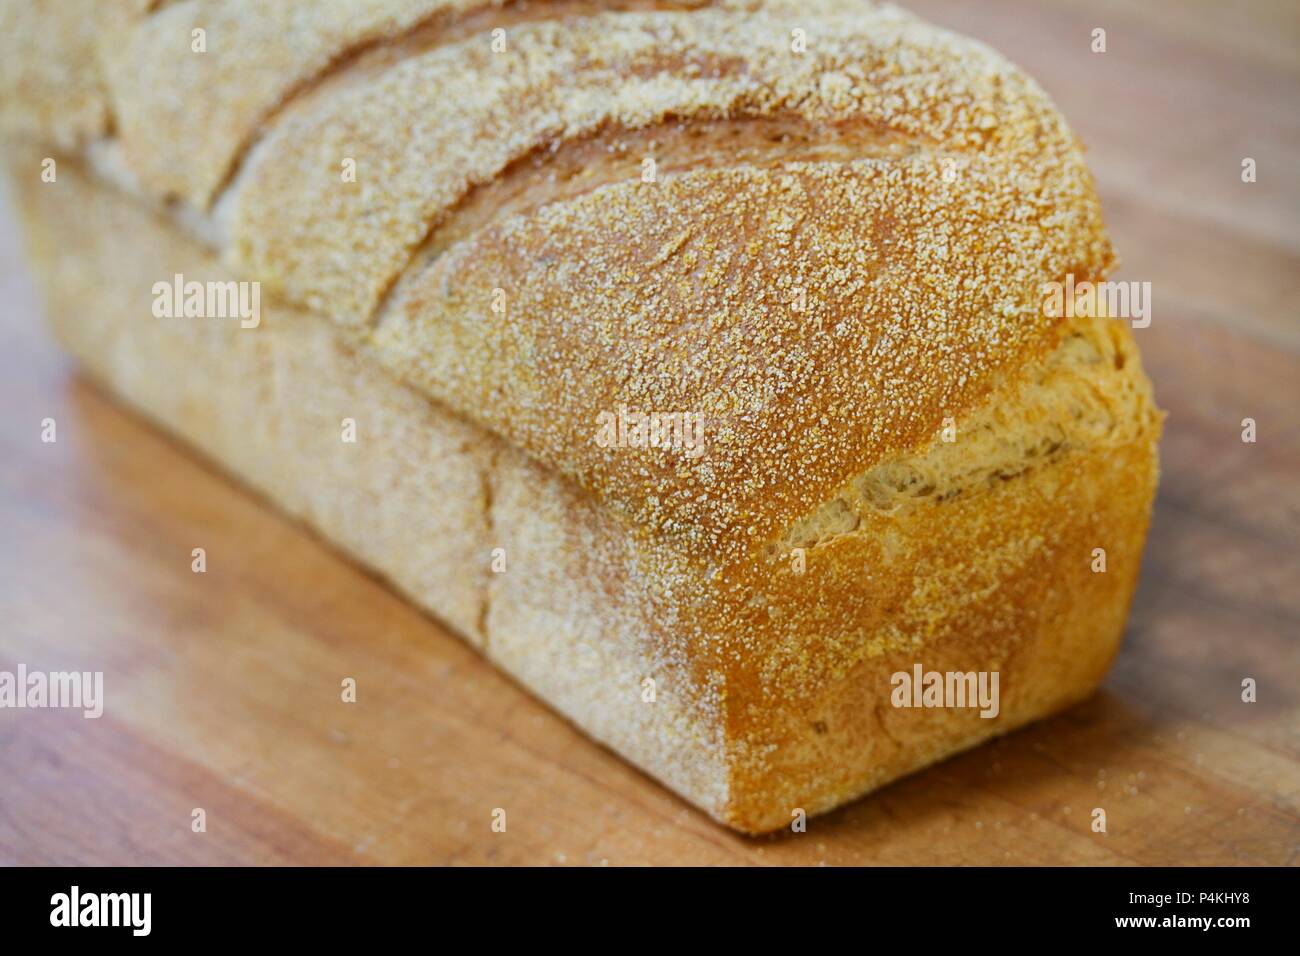 A loaf of white bread on a wooden table Stock Photo